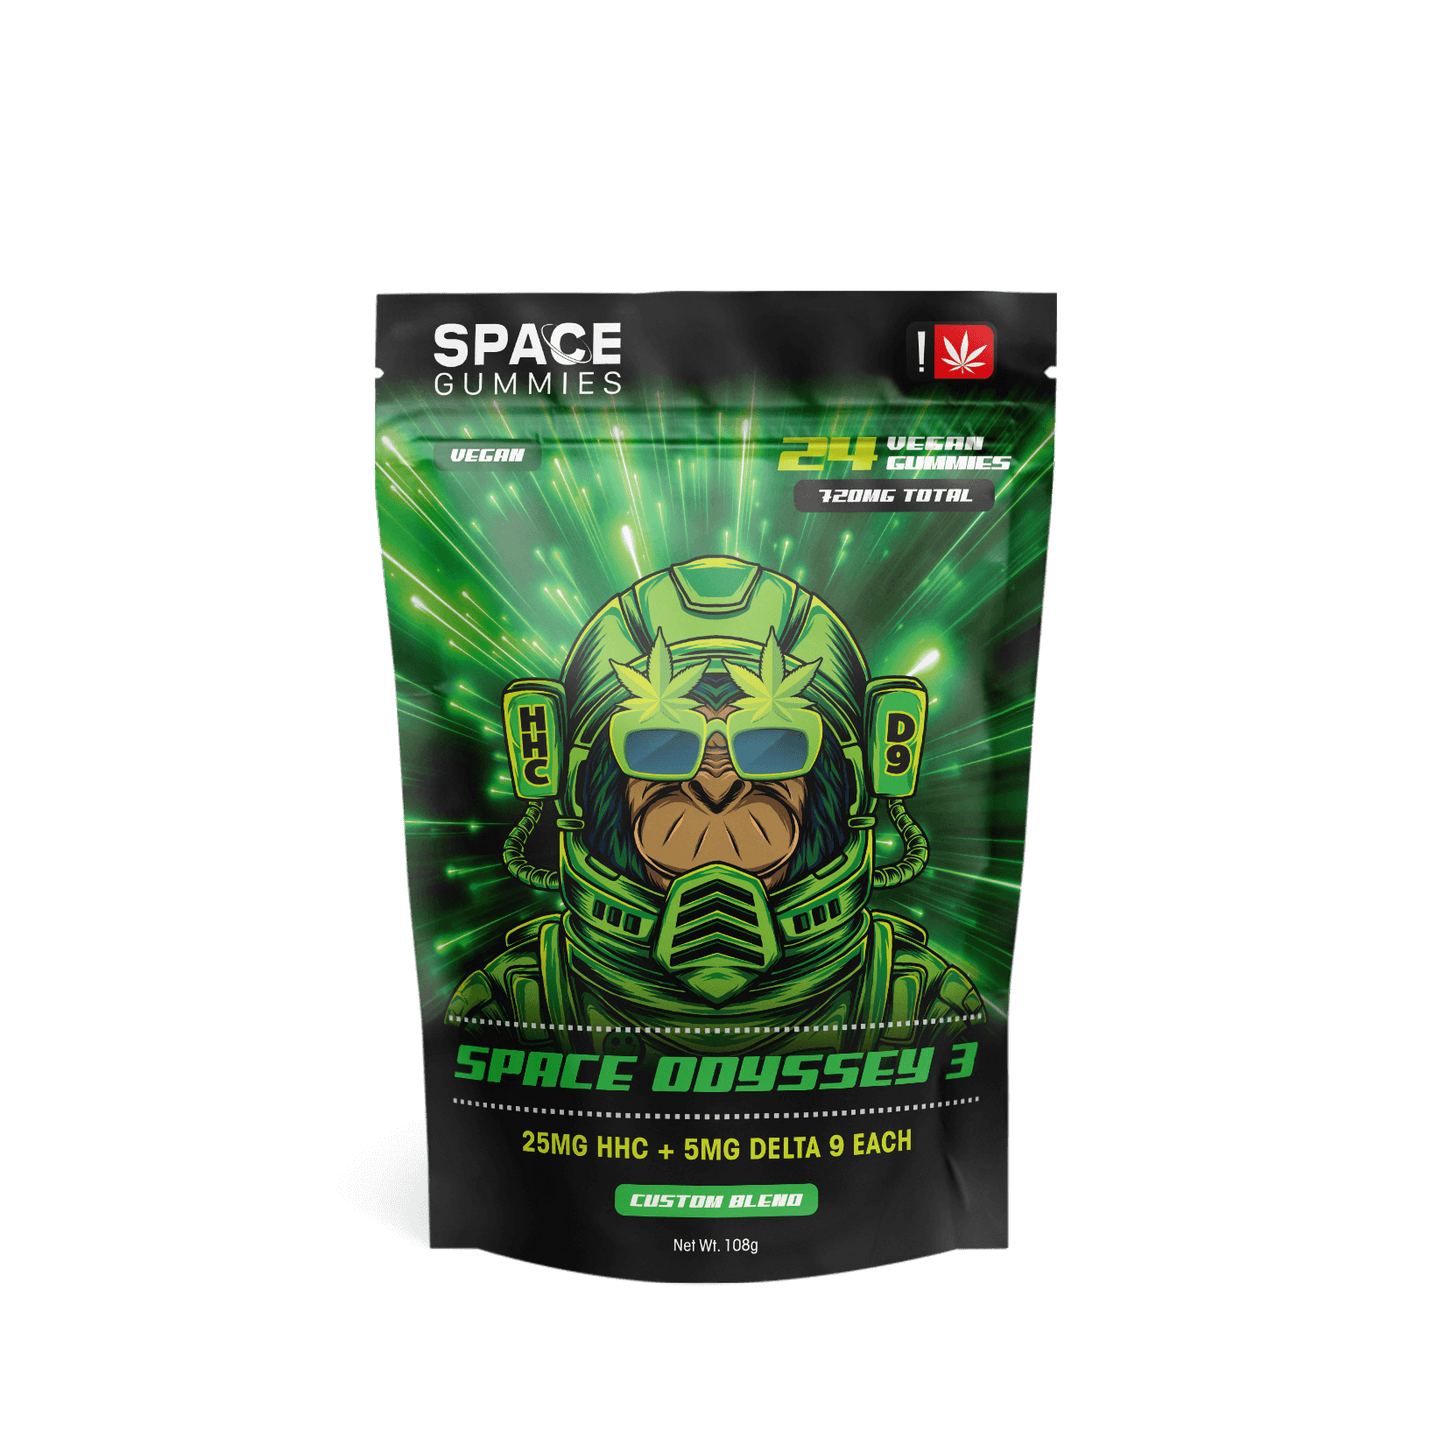 These wholesale vegan space gummies come with 25mg HHC and 5mg Delta 9 THC